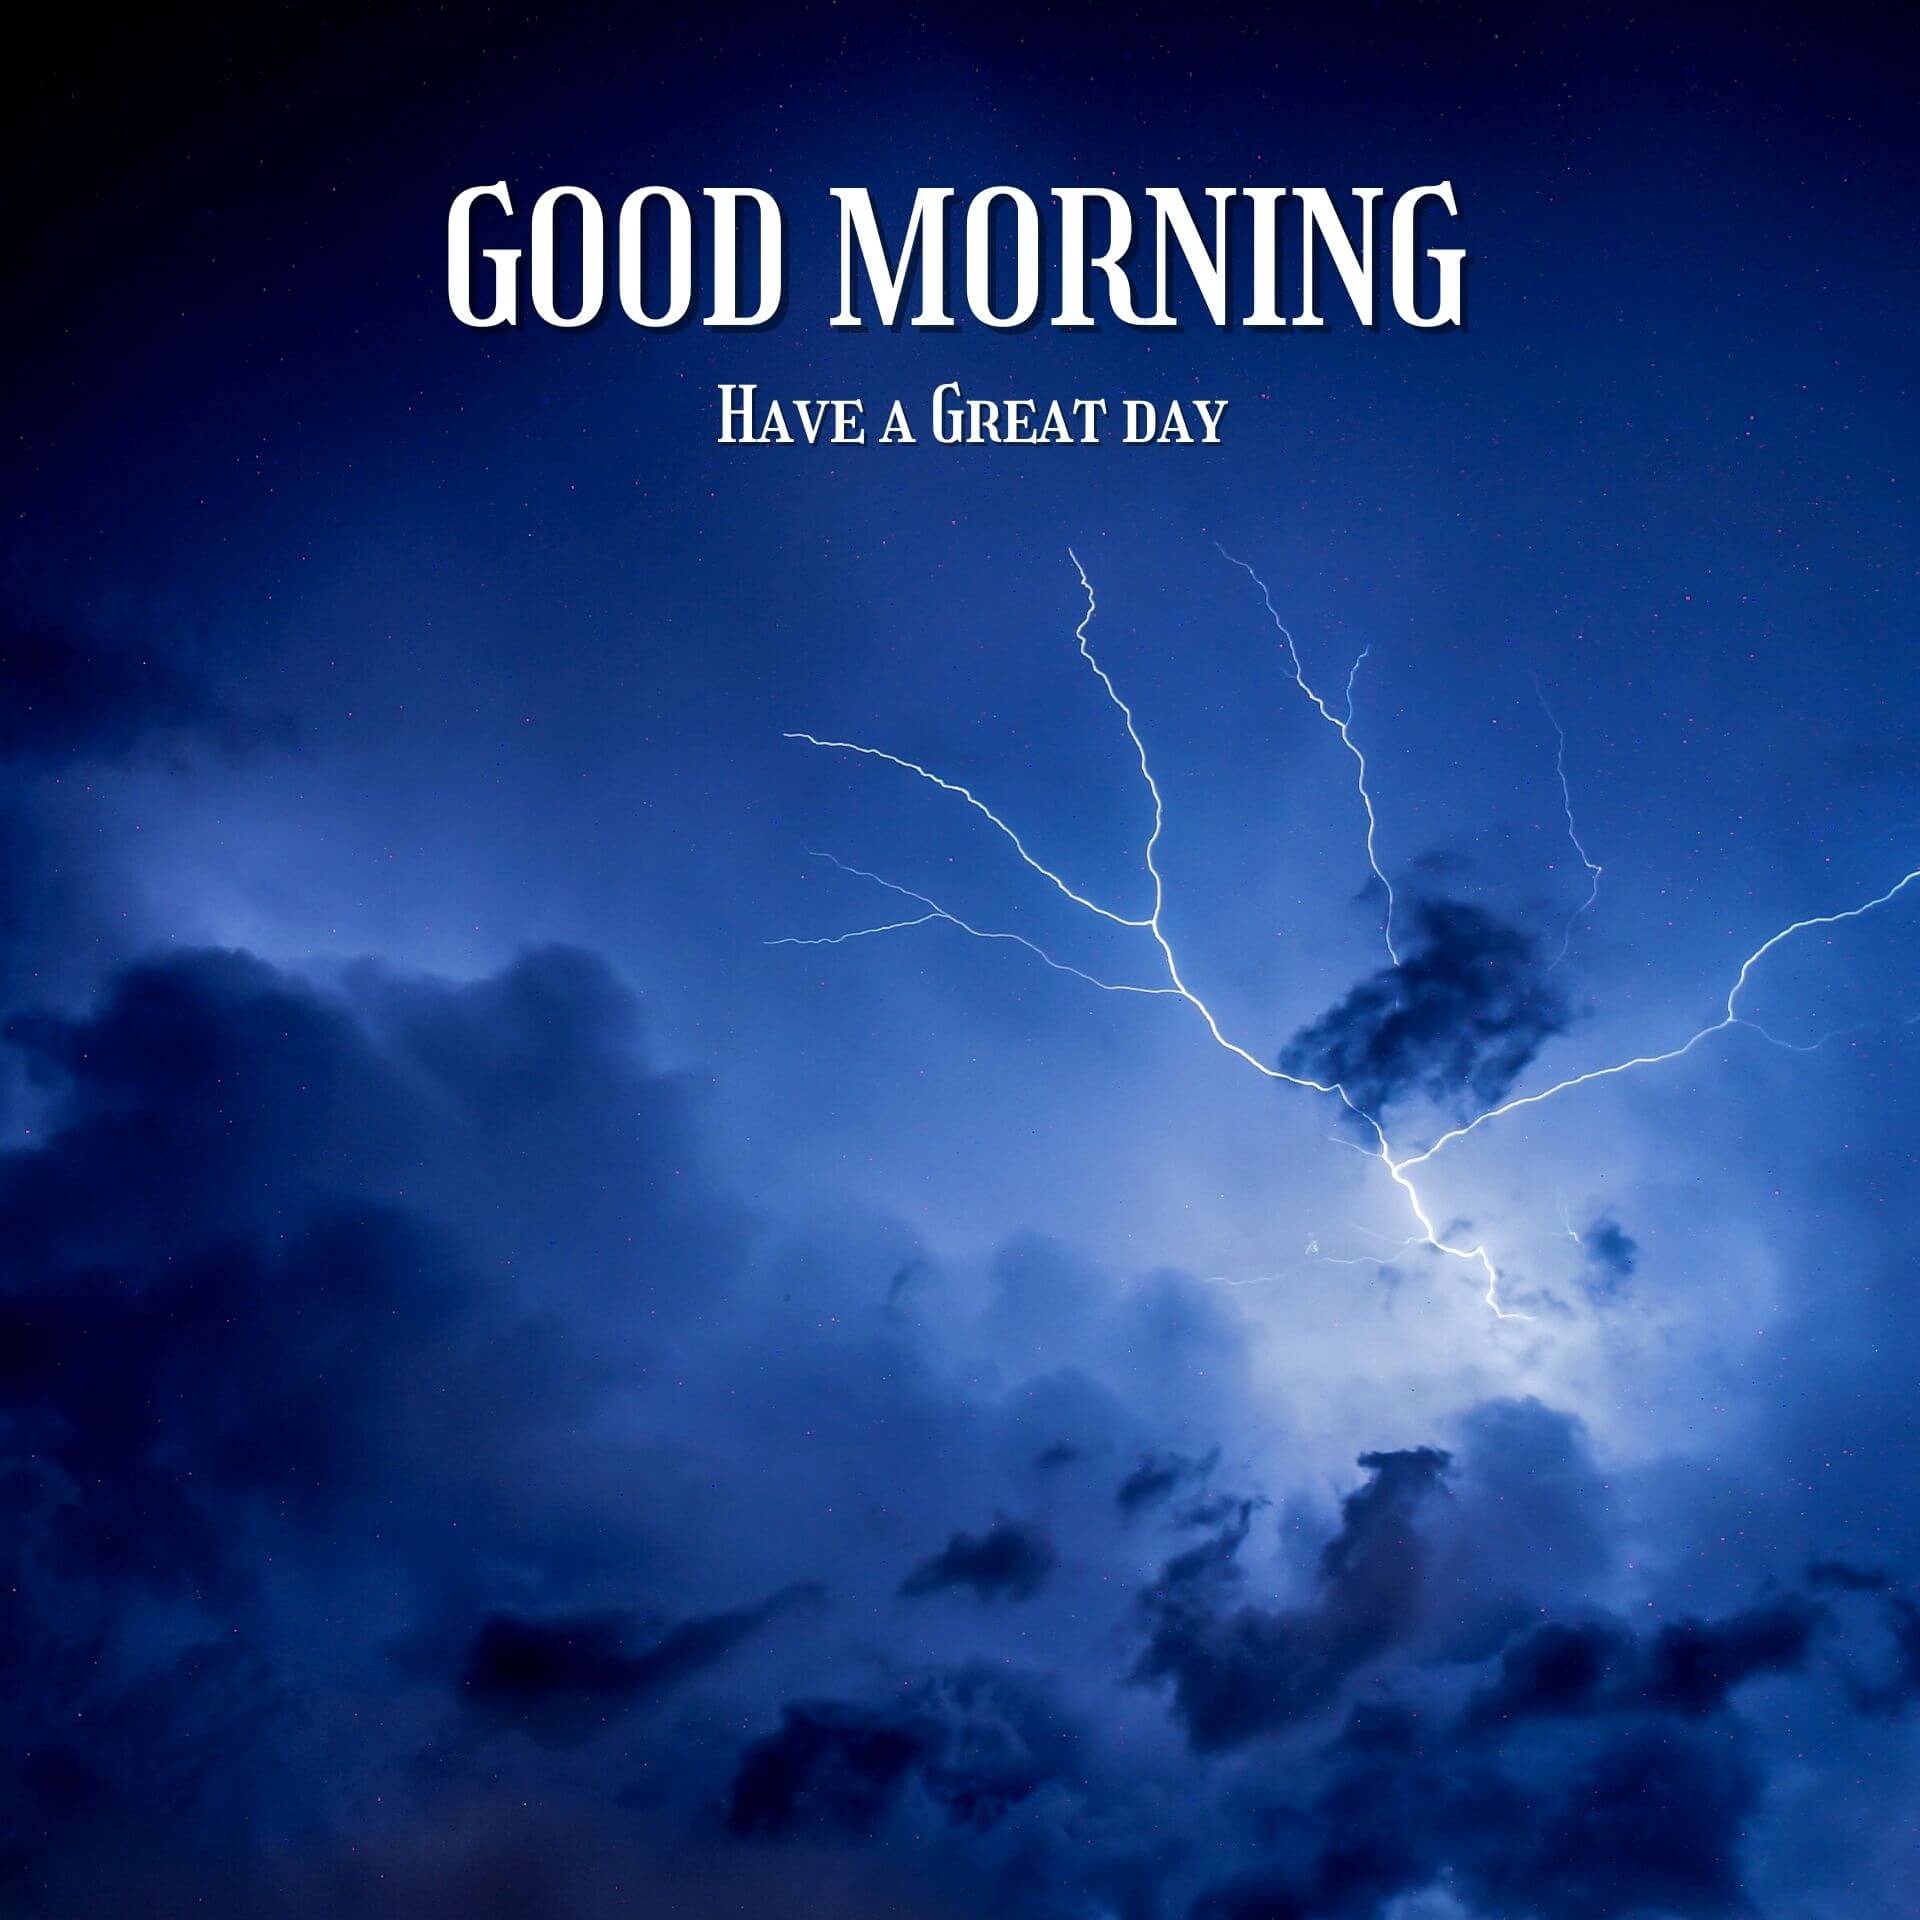 Good morning have a nice day Pics Wallpaper Free Download